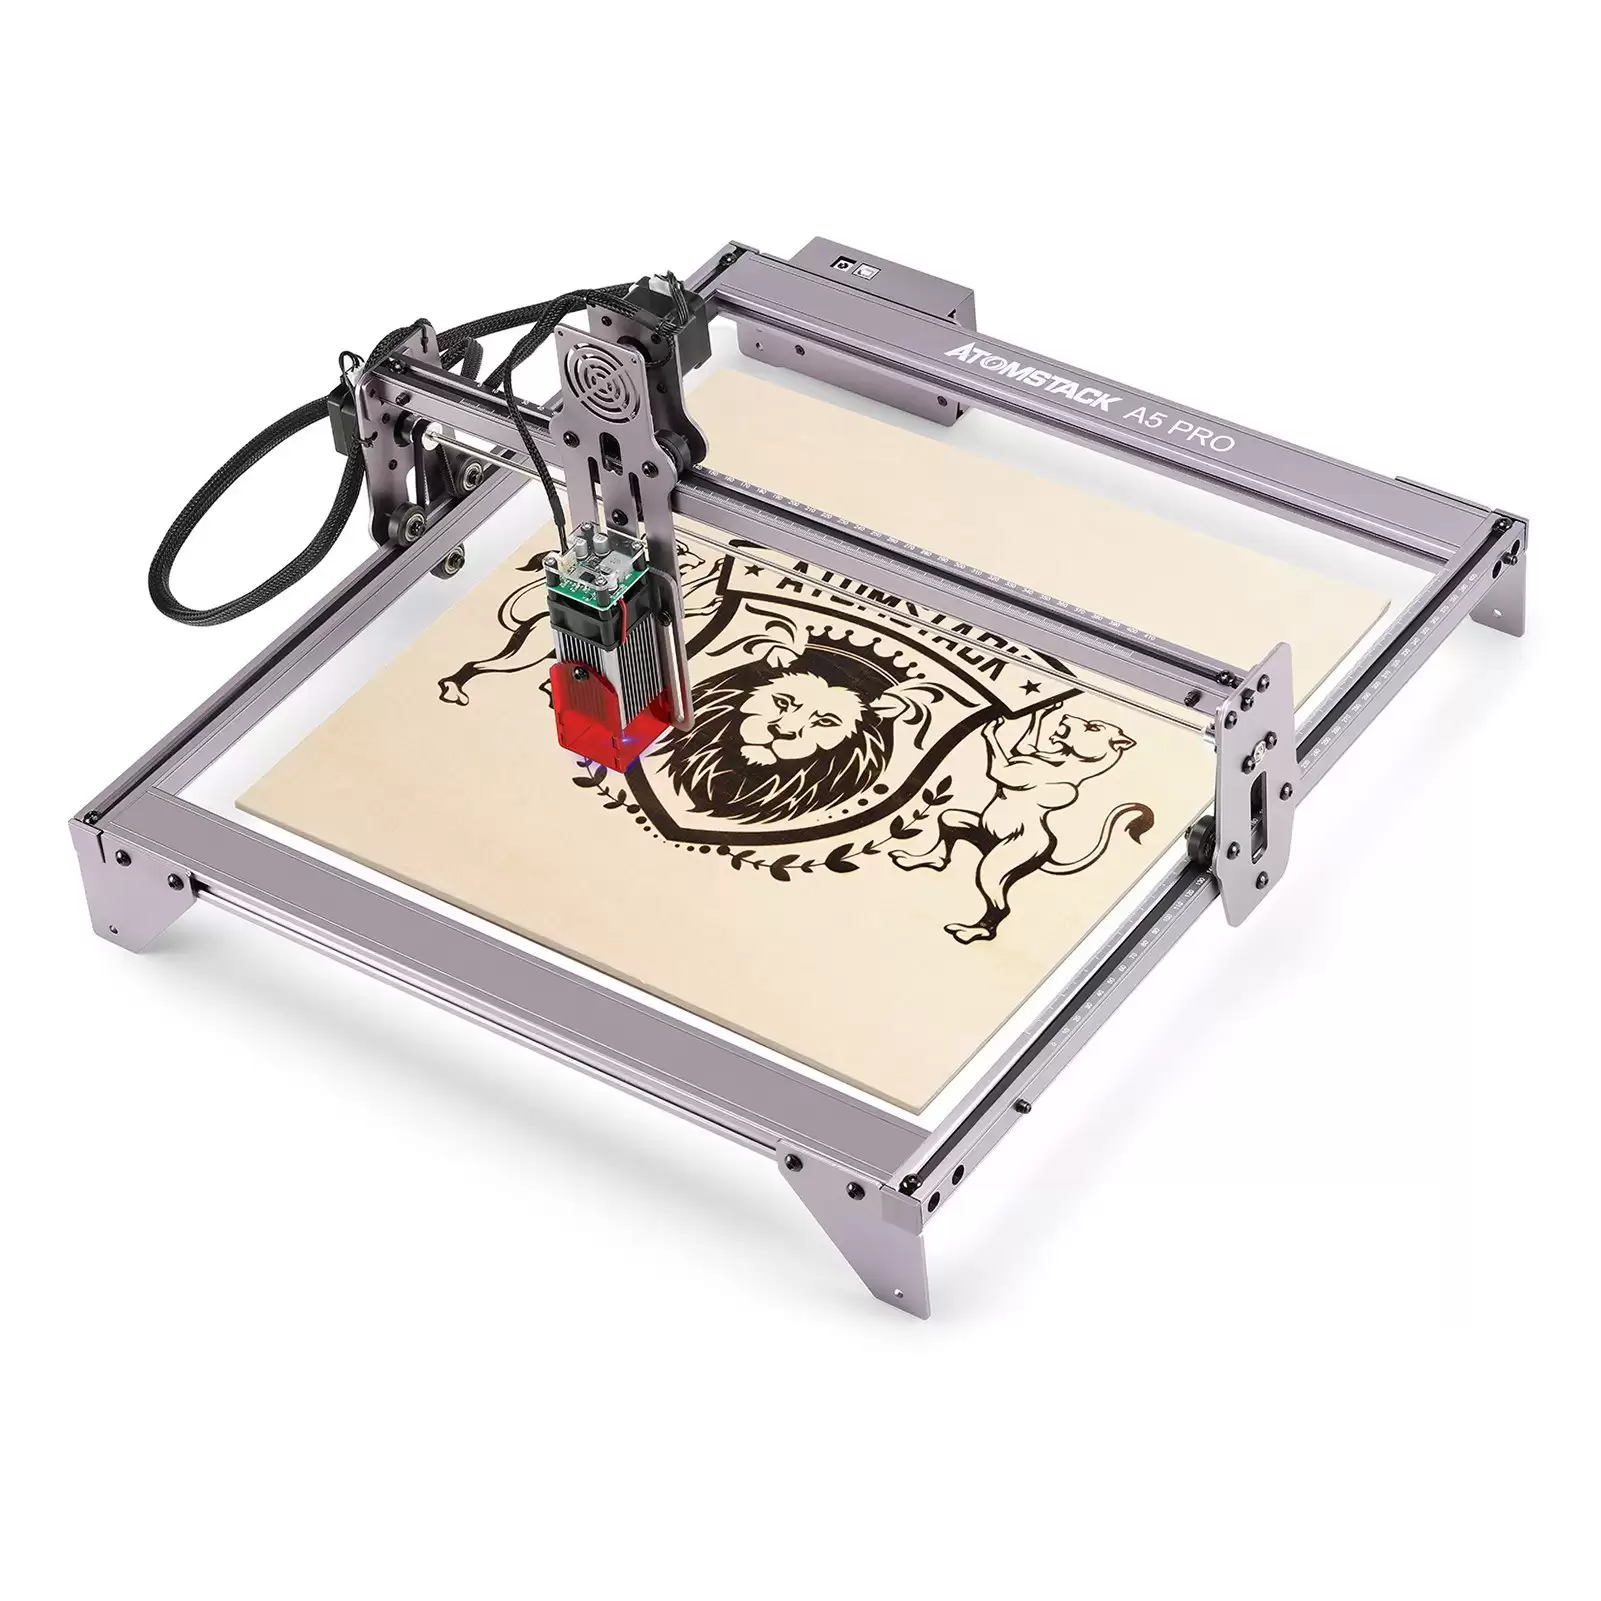 Order In Just $269 Atomstack A5 Pro 40w Laser Engraver Cnc Desktop Diy Laser + Free Shipping With This Discount Coupon At Tomtop